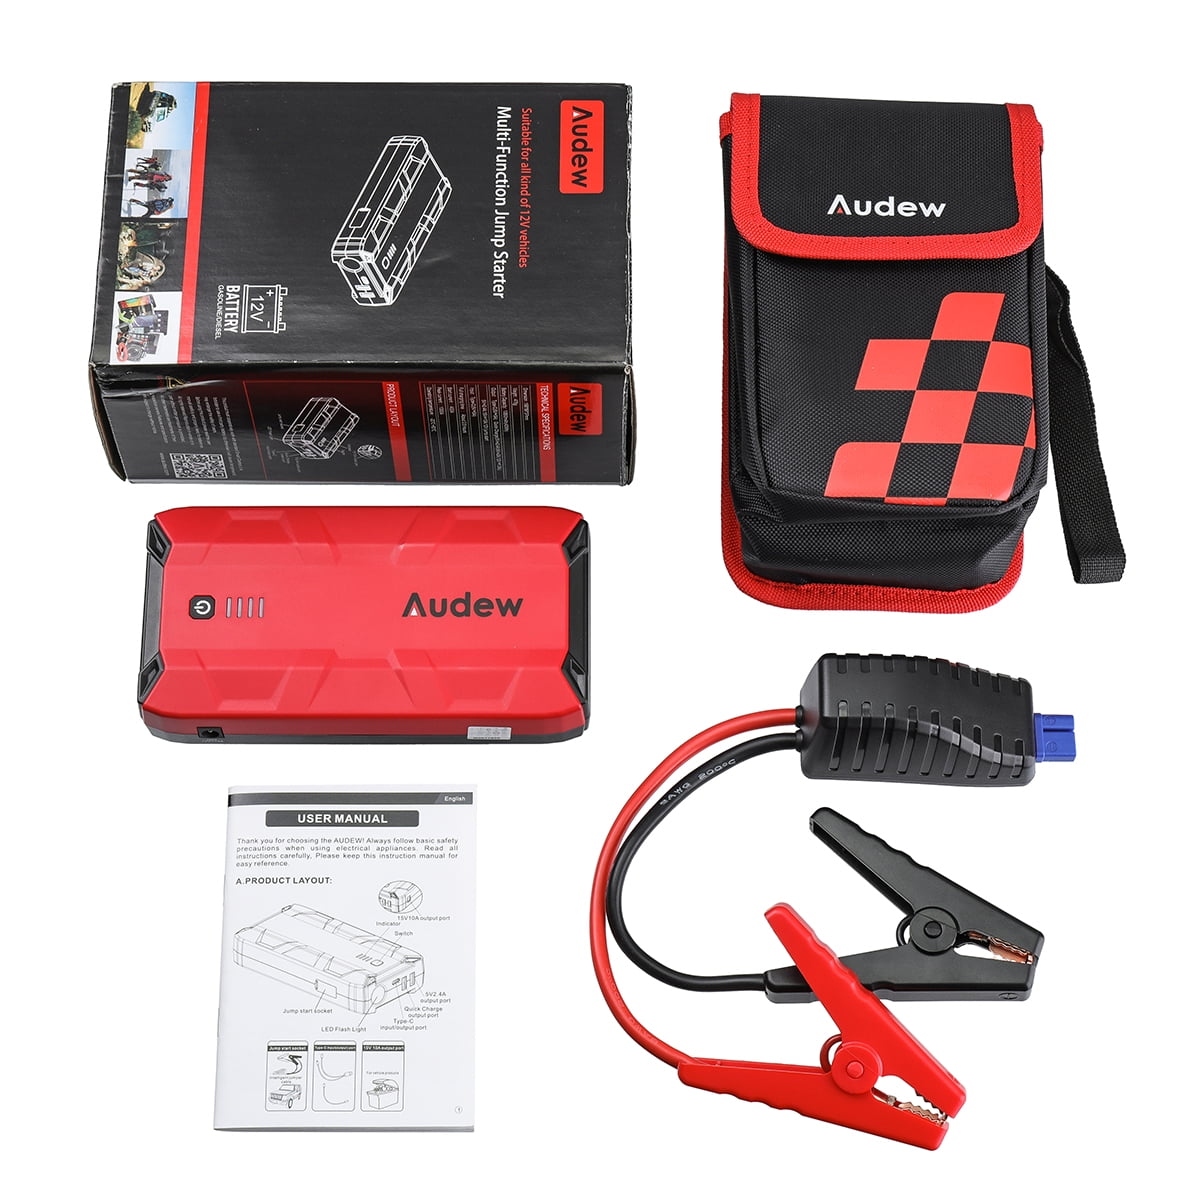 ,12V Power Pack Jumper Start & Phone Charger with USB Port Portable Car Battery Charger Jump Starter,1000A Peak Auto Jump Box Cables & LED Flashlight 1119 Up to 6L Gas or 4L Diesel Engine